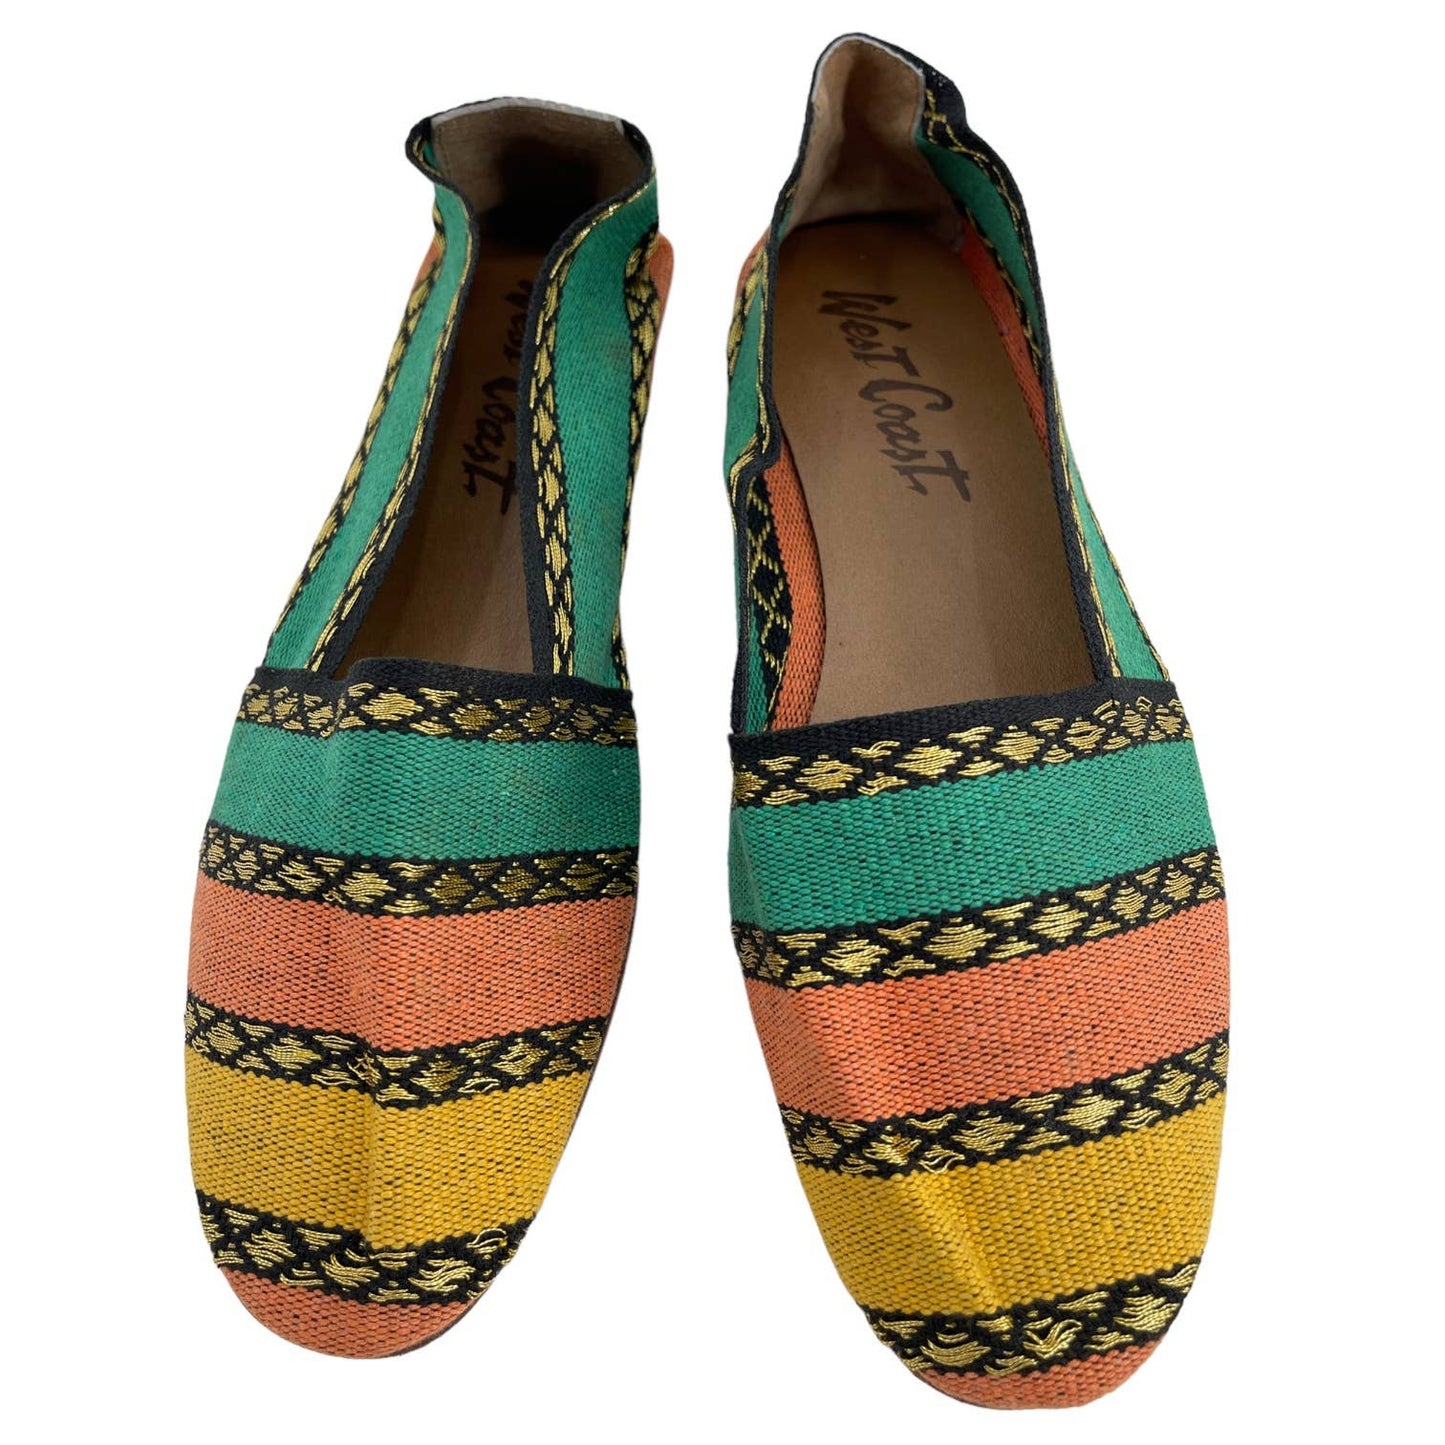 Vintage 80s Woven Cotton Flat Loafers Striped Gold Geometric Design West Coast 8